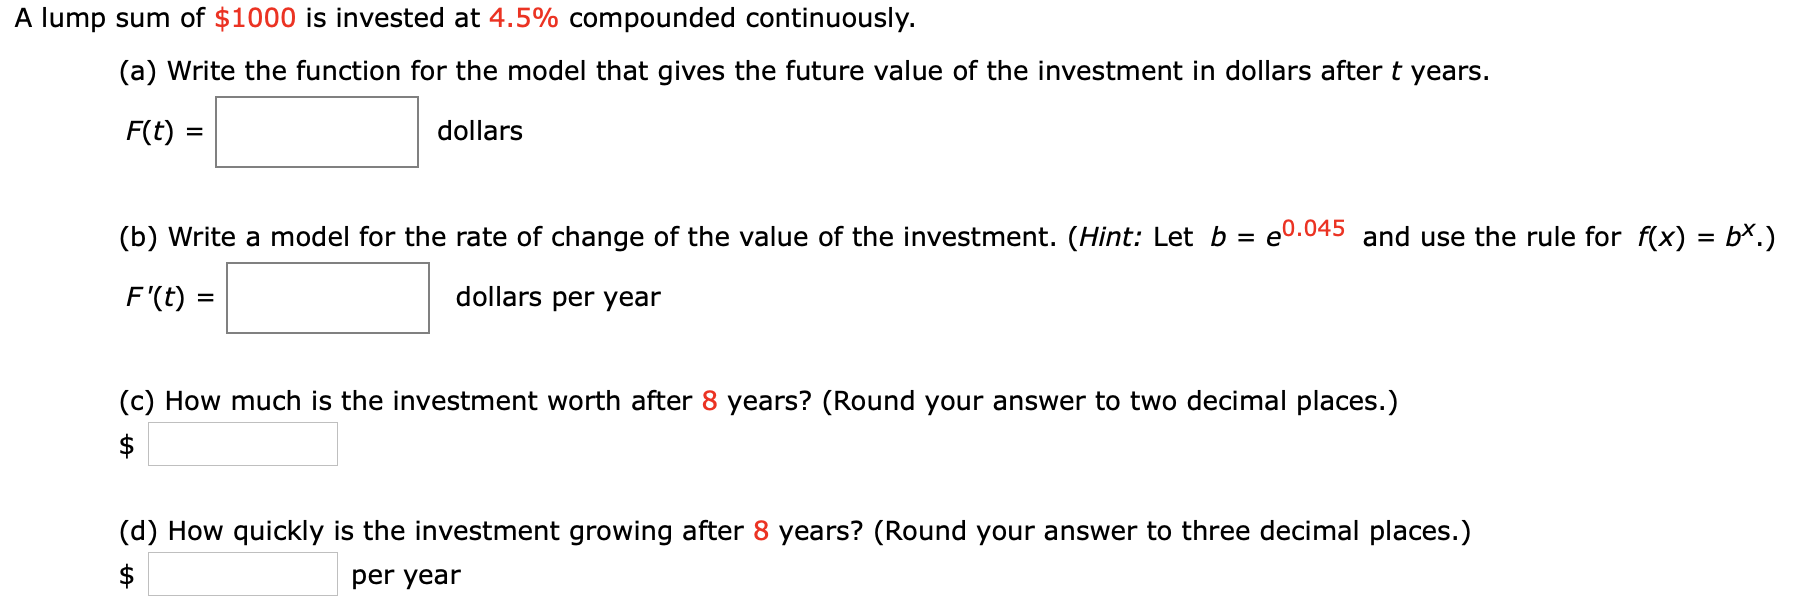 A lump sum of $1000 is invested at 4.5% compounded continuously.
(a) Write the function for the model that gives the future value of the investment in dollars after t years.
F(t)
dollars
(b) Write a model for the rate of change of the value of the investment. (Hint: Let b = e0.045 and use the rule for f(x) = b*.)
dollars per year
F'(t)
=
(c) How much is the investment worth after 8 years? (Round your answer to two decimal places.)
$
(d) How quickly is the investment growing after 8 years? (Round your answer to three decimal places.)
$
per year
